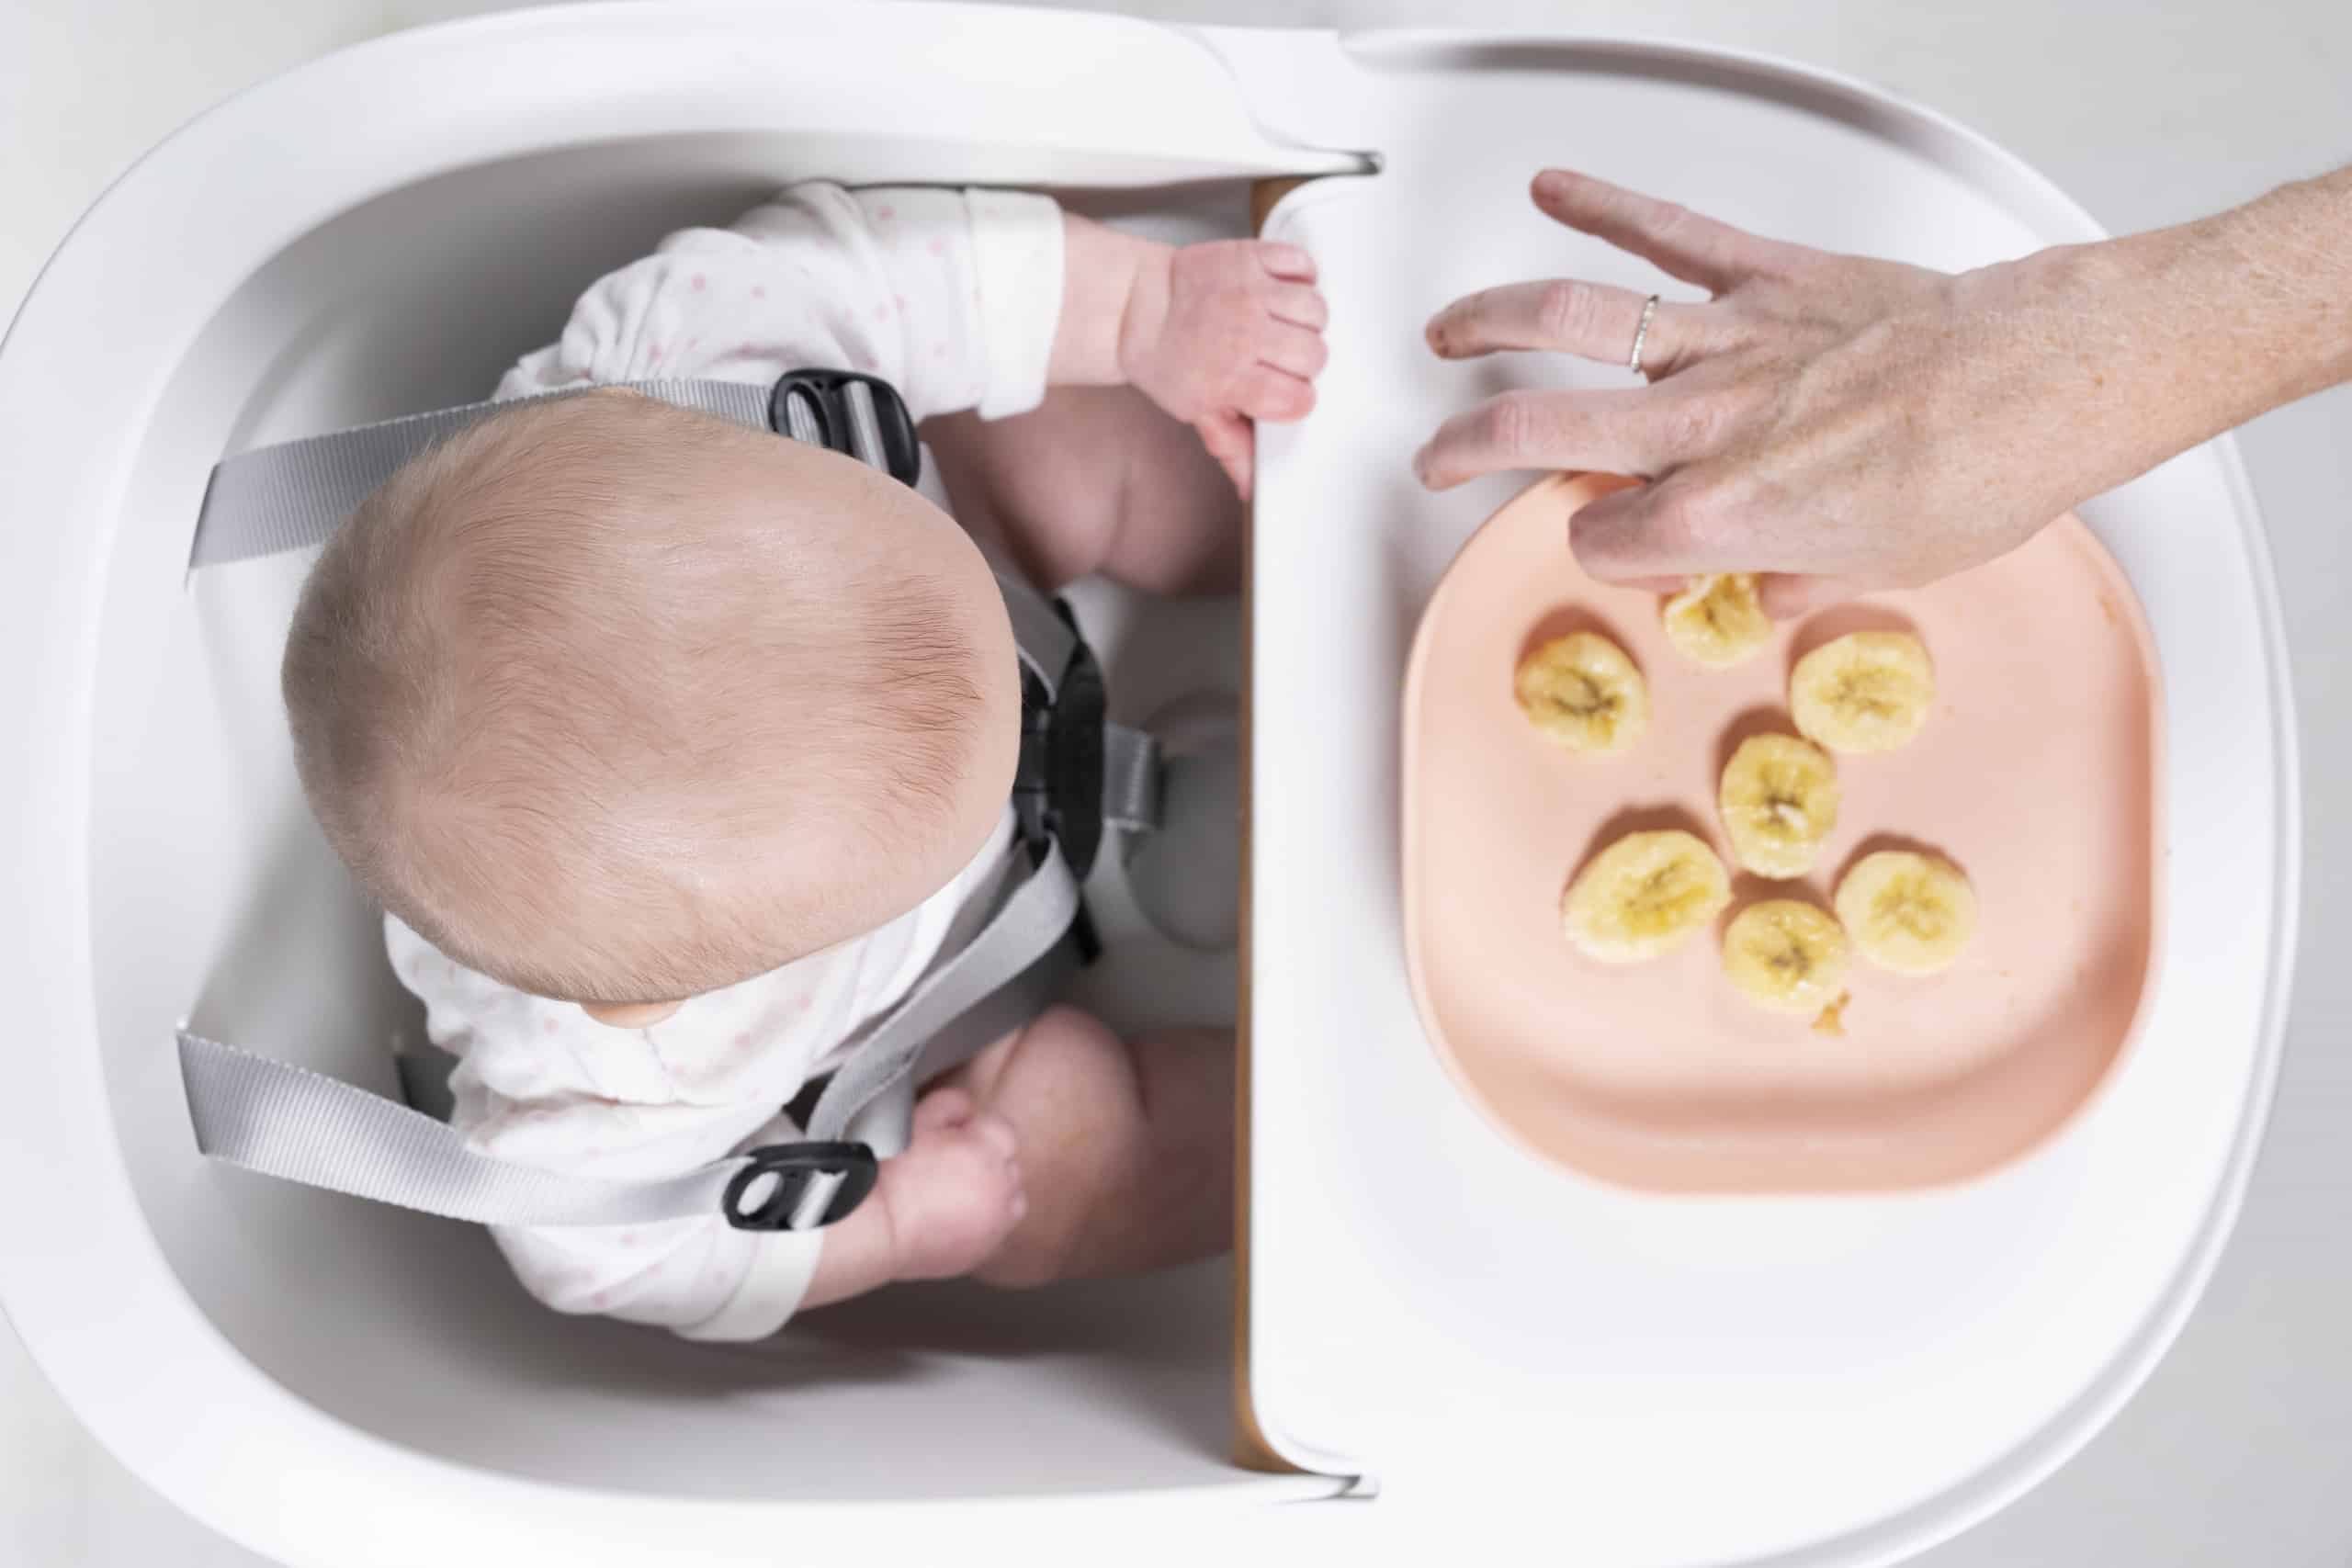 Mom feeding baby bananas from silicone suction plate rose